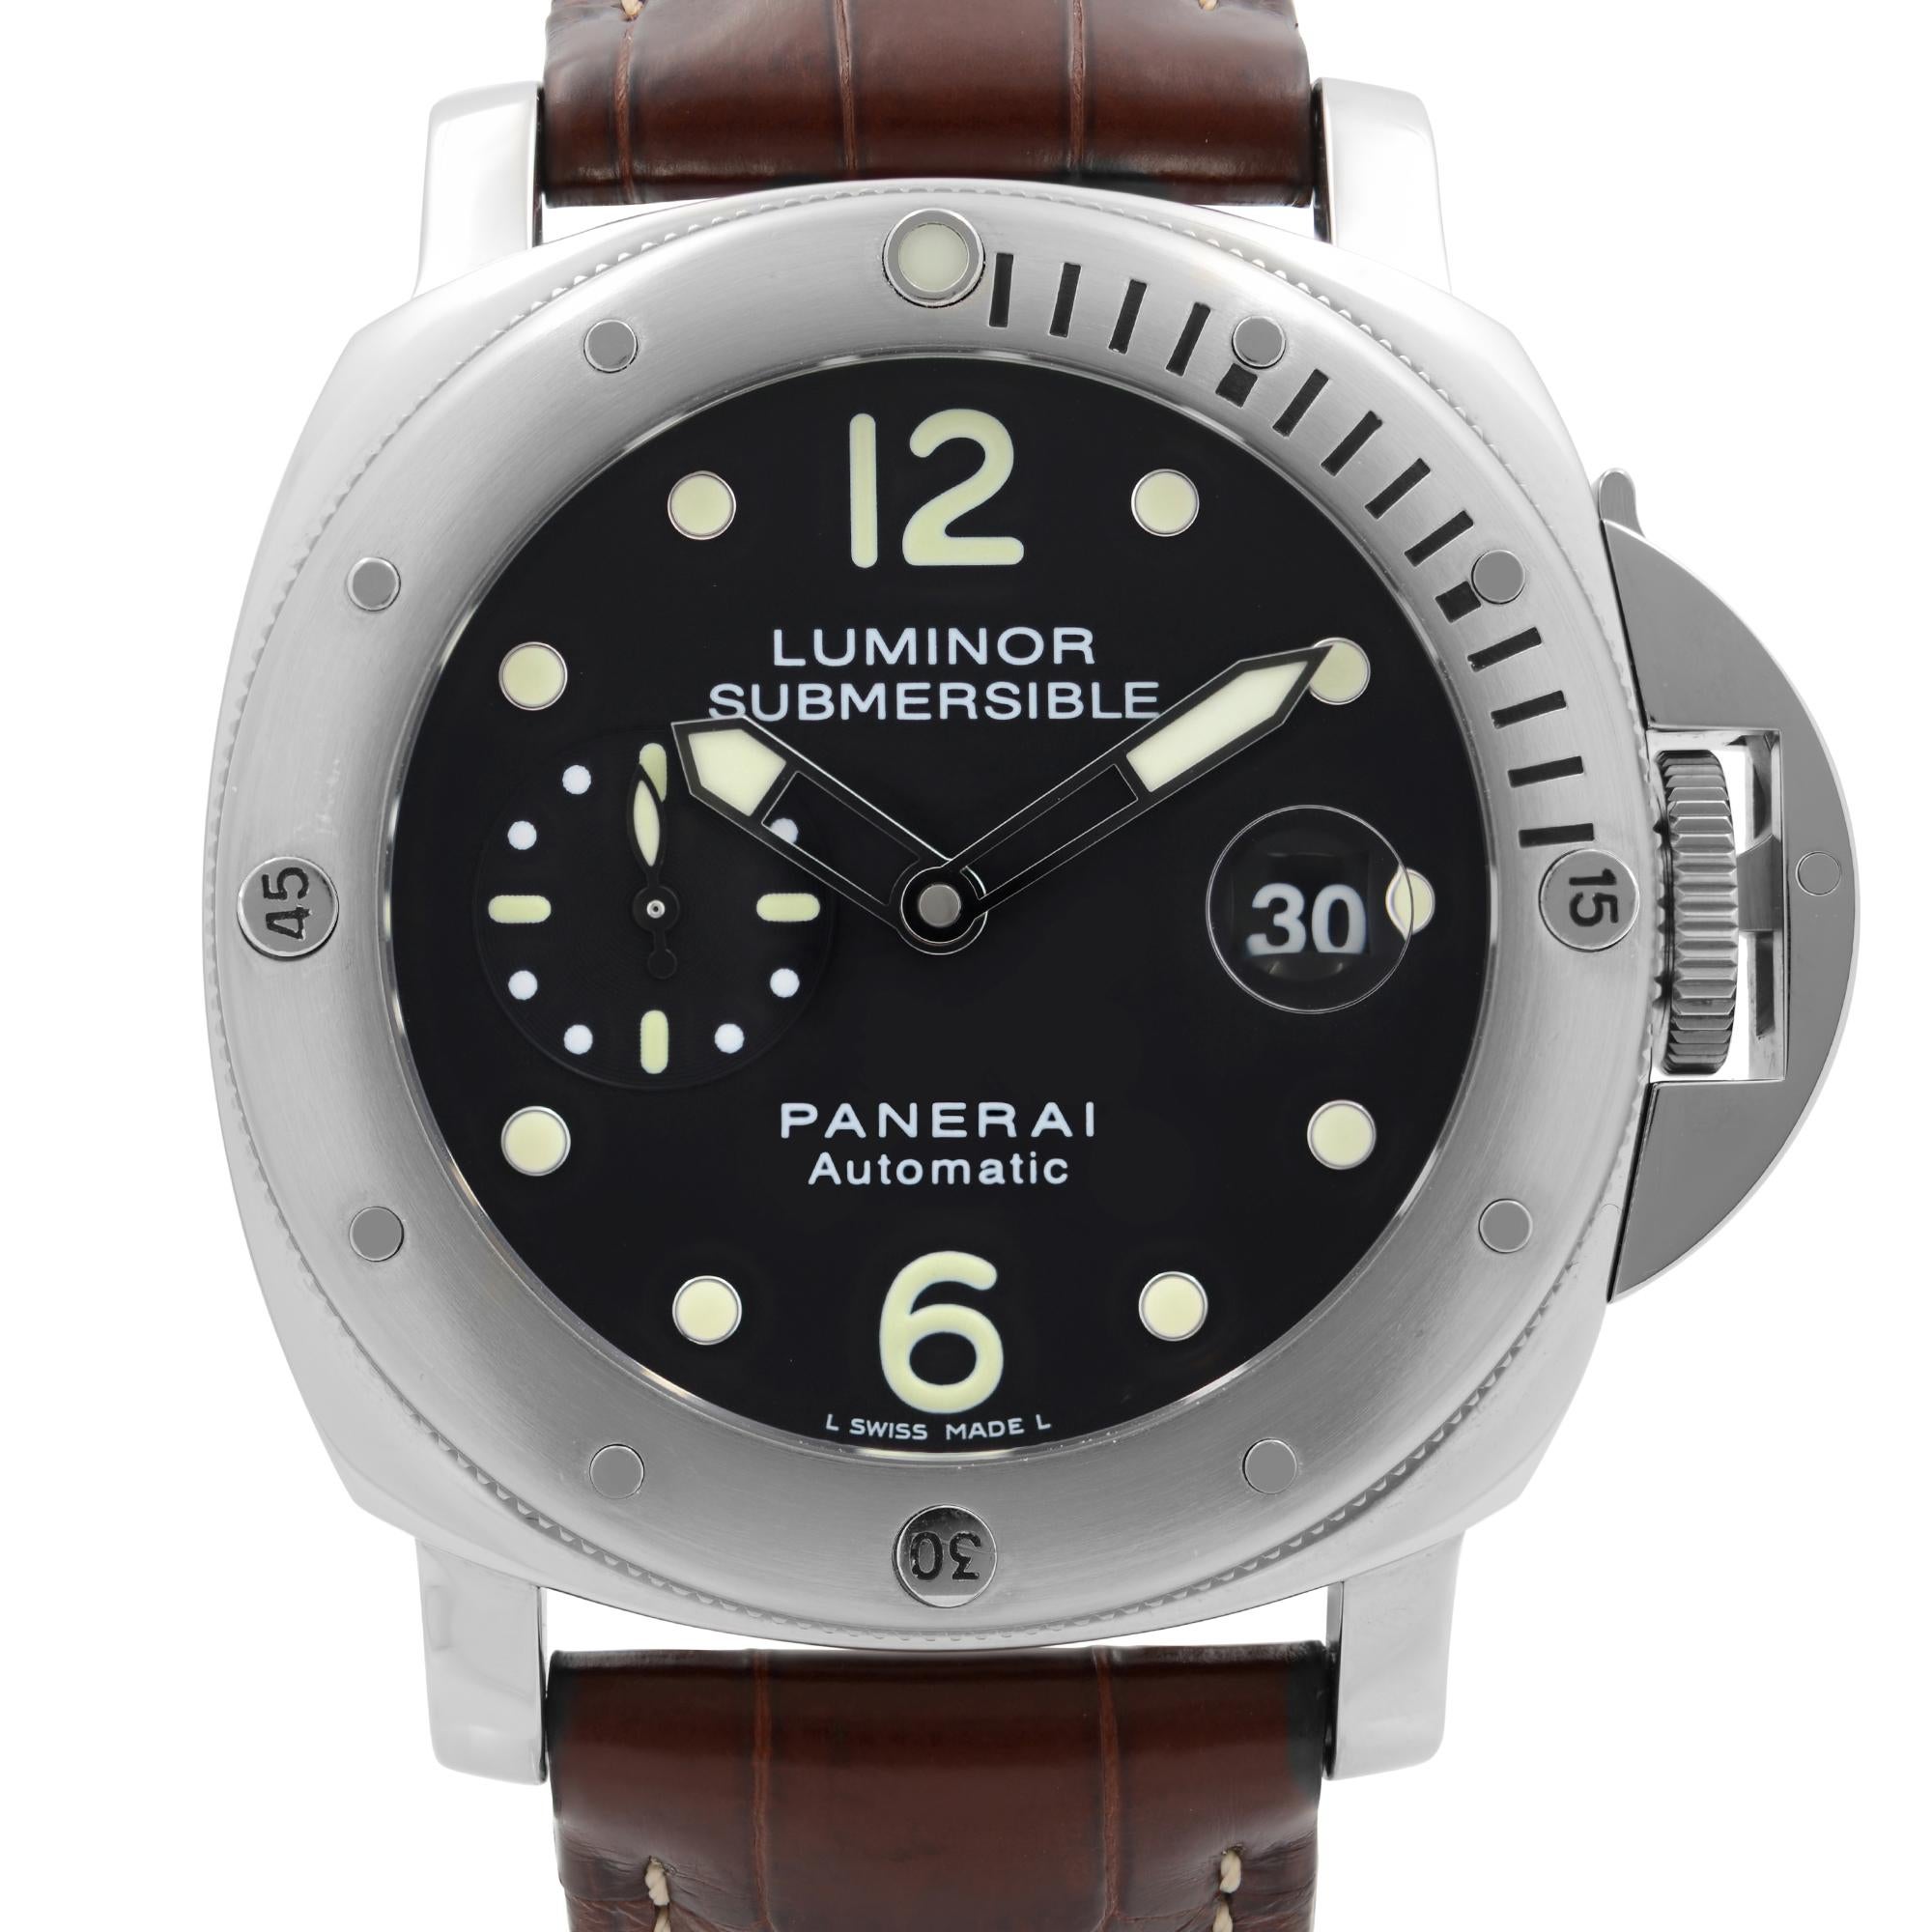 This pre-owned Panerai Luminor Submersible PAM00024 is a beautiful men's timepiece that is powered by a mechanical (automatic) movement which is cased in a stainless steel case. It has a round shape face, date indicator, small seconds subdial dial,